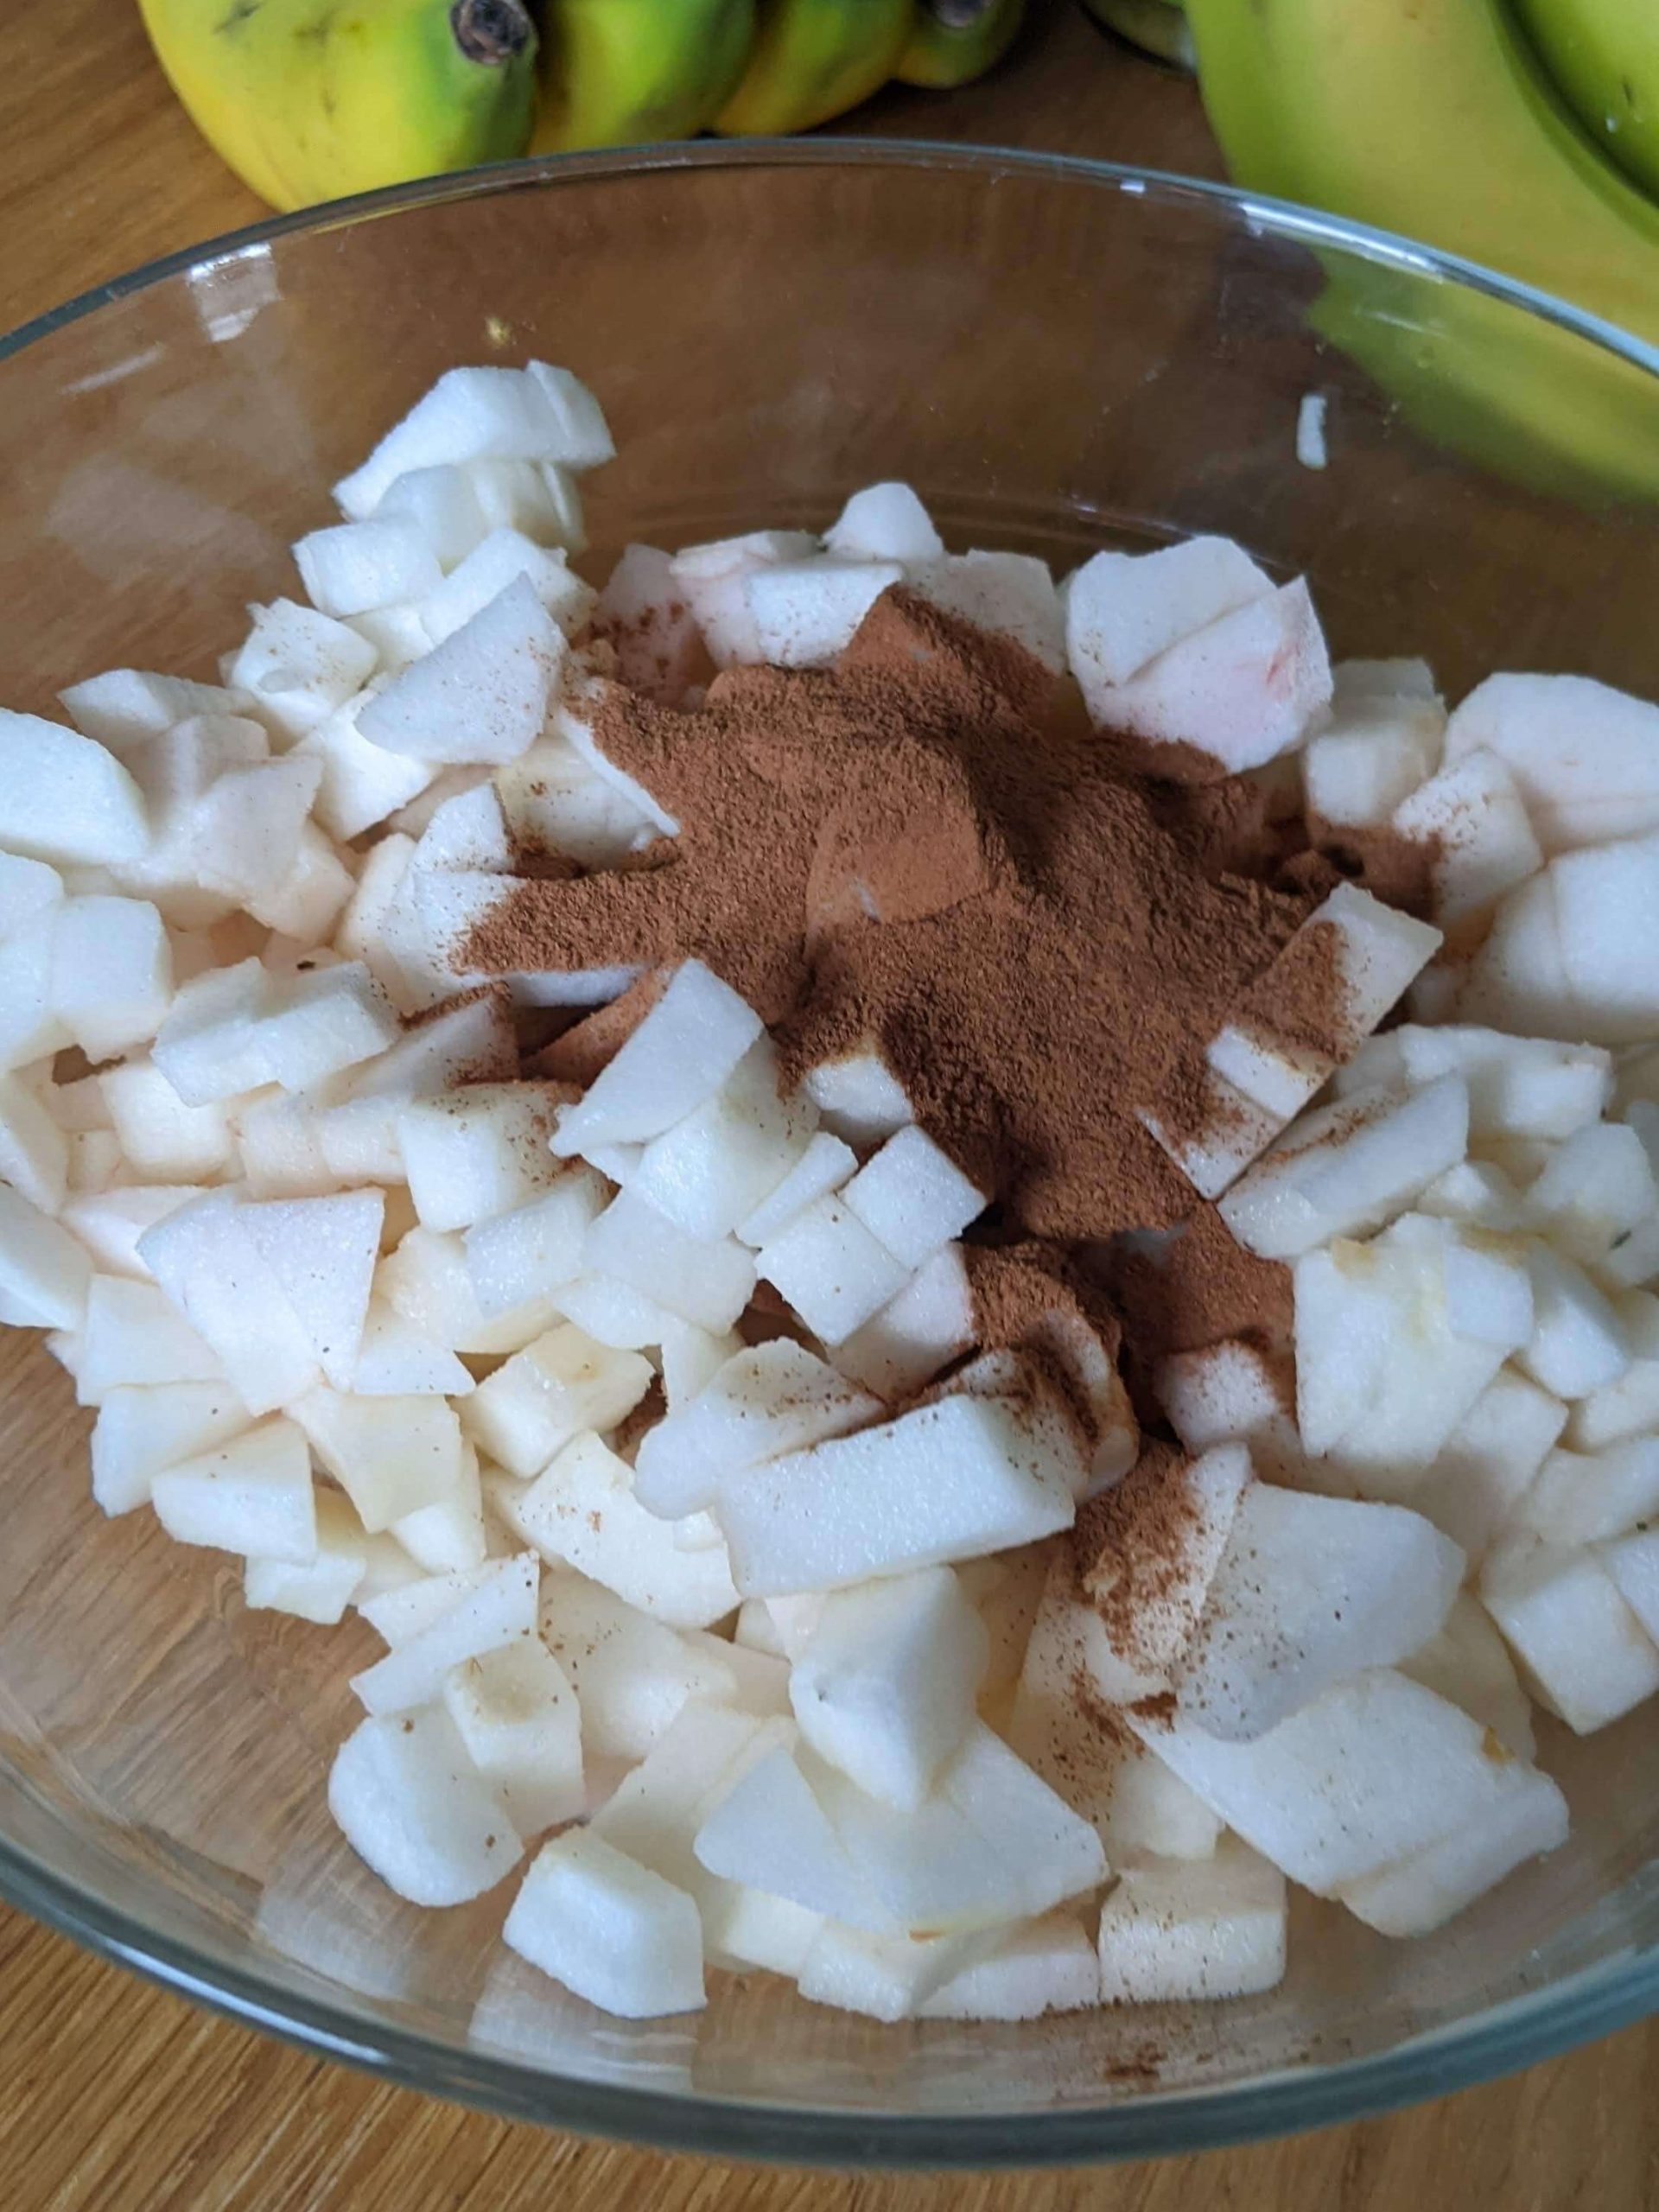 diced apples with cinnamon on top